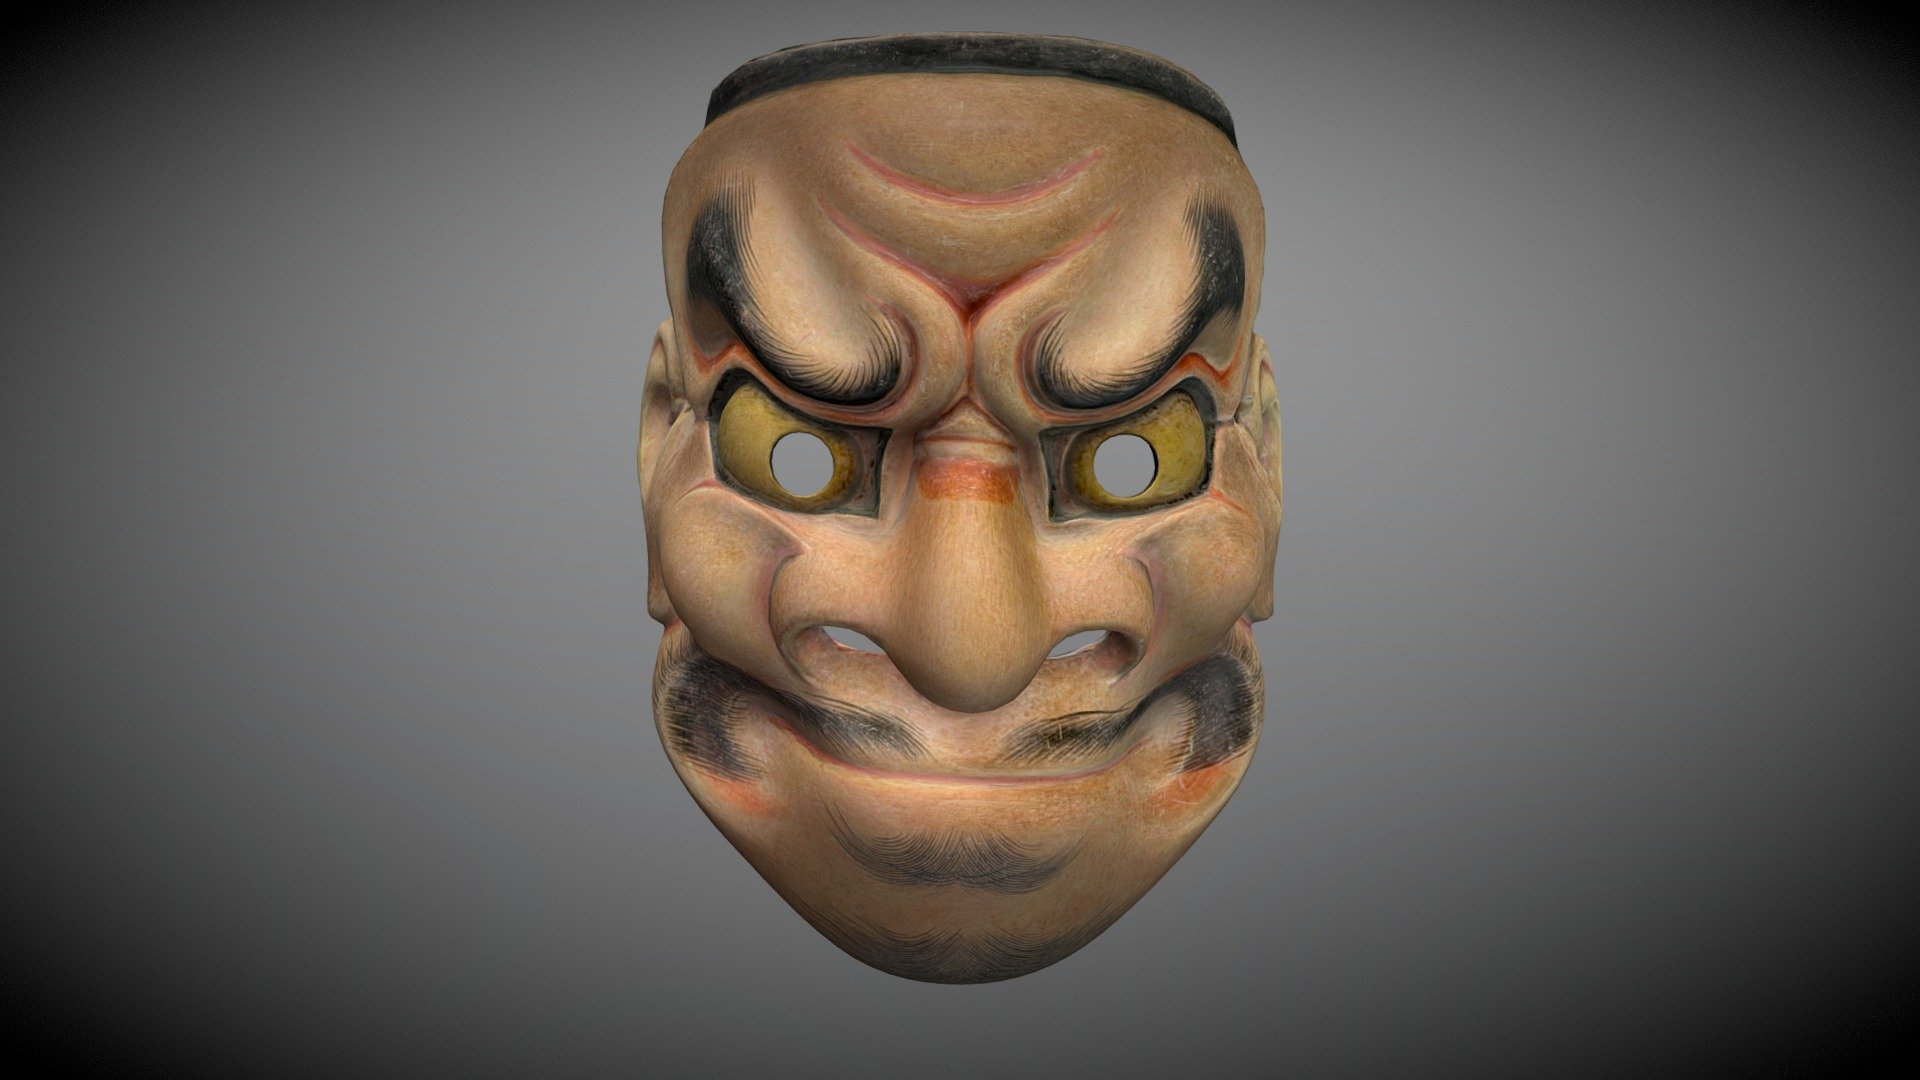 This mask is used in the Noh play entitled Kurama Tengu (鞍馬天狗) by Katayama Kuroemon X of the Kanze (観世) school of Noh. 

It was scanned in 2017 for the NOxAR exhibition at Rohm Theater in Kyoto, Japan by KYOTO VR, as part of Kyoto Project, a collaboration between Kyoto City, the Japanese Ministry of Culture to blend technology with Japanese traditional arts - Noh Mask: Kurama Tengu - 3D model by KyotoVR 3d model